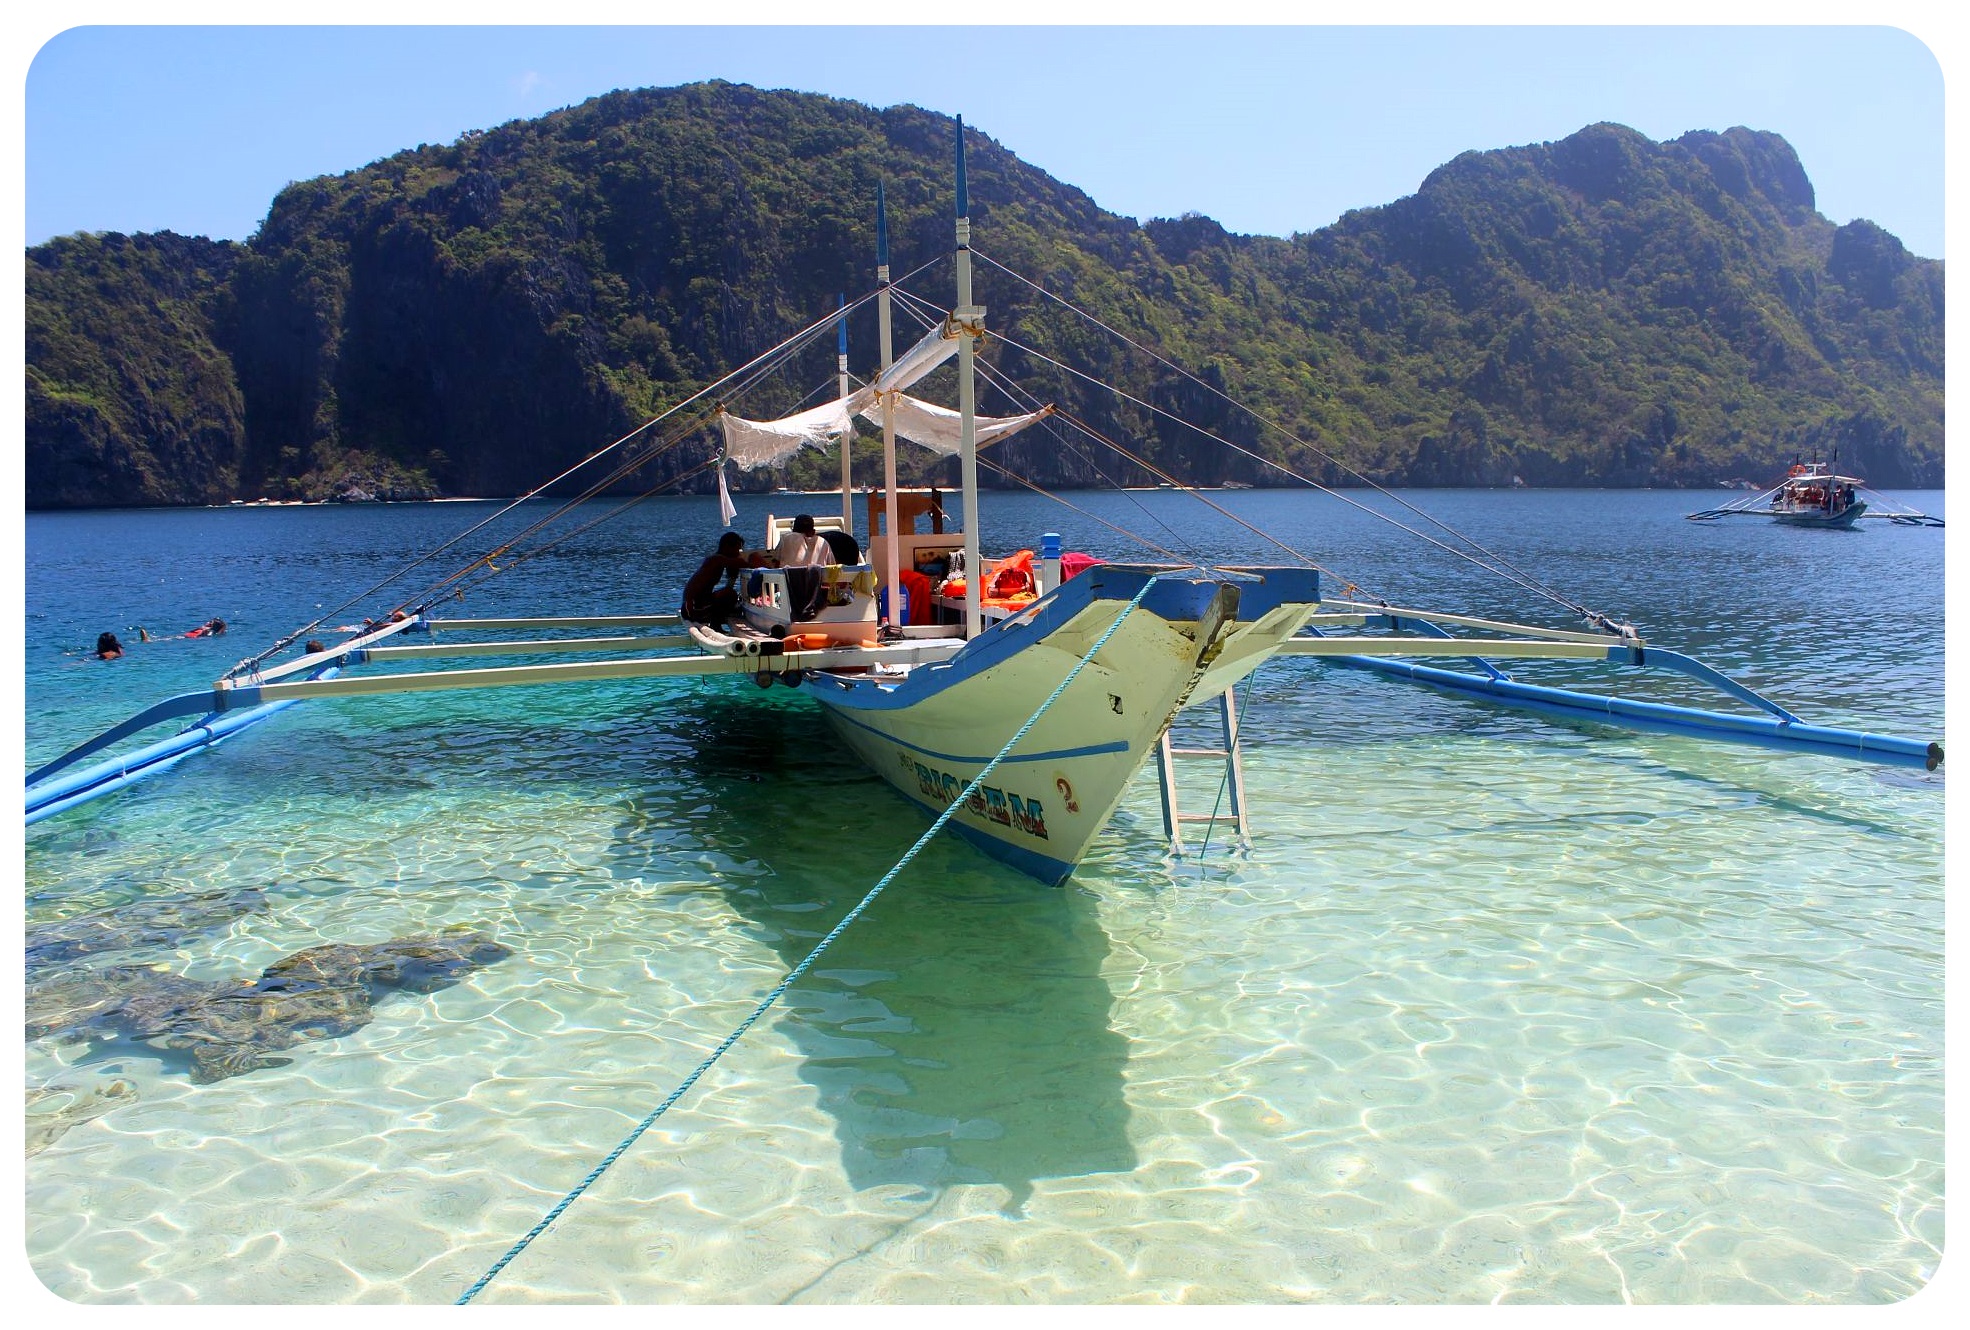 The grand finale of my Philippines trip: El Nido (Part II)